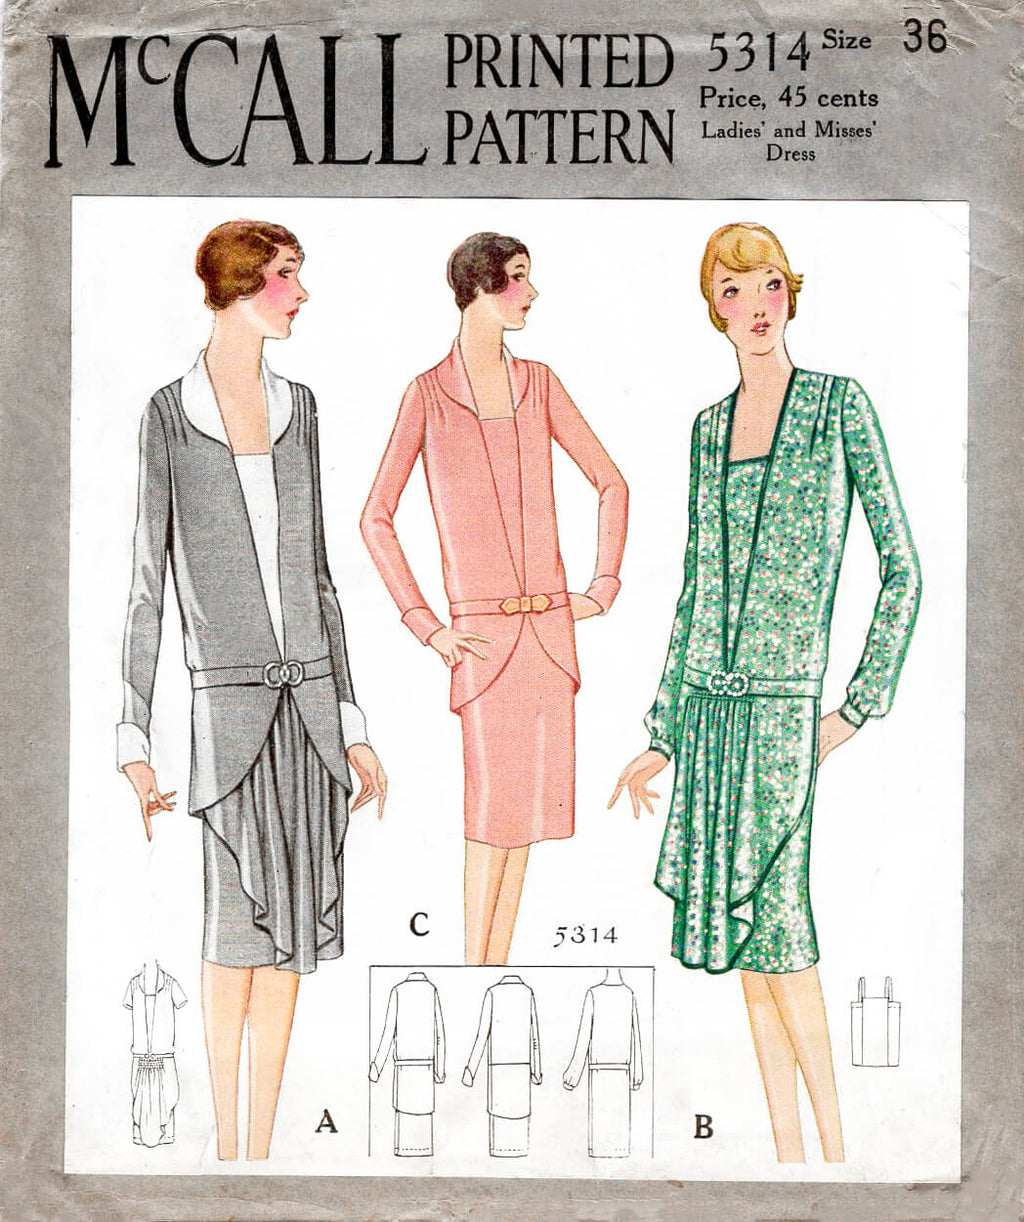 McCall 5314 1920s 1930s drop waist dress deep v neckline camisole layer vintage sewing pattern reproduction